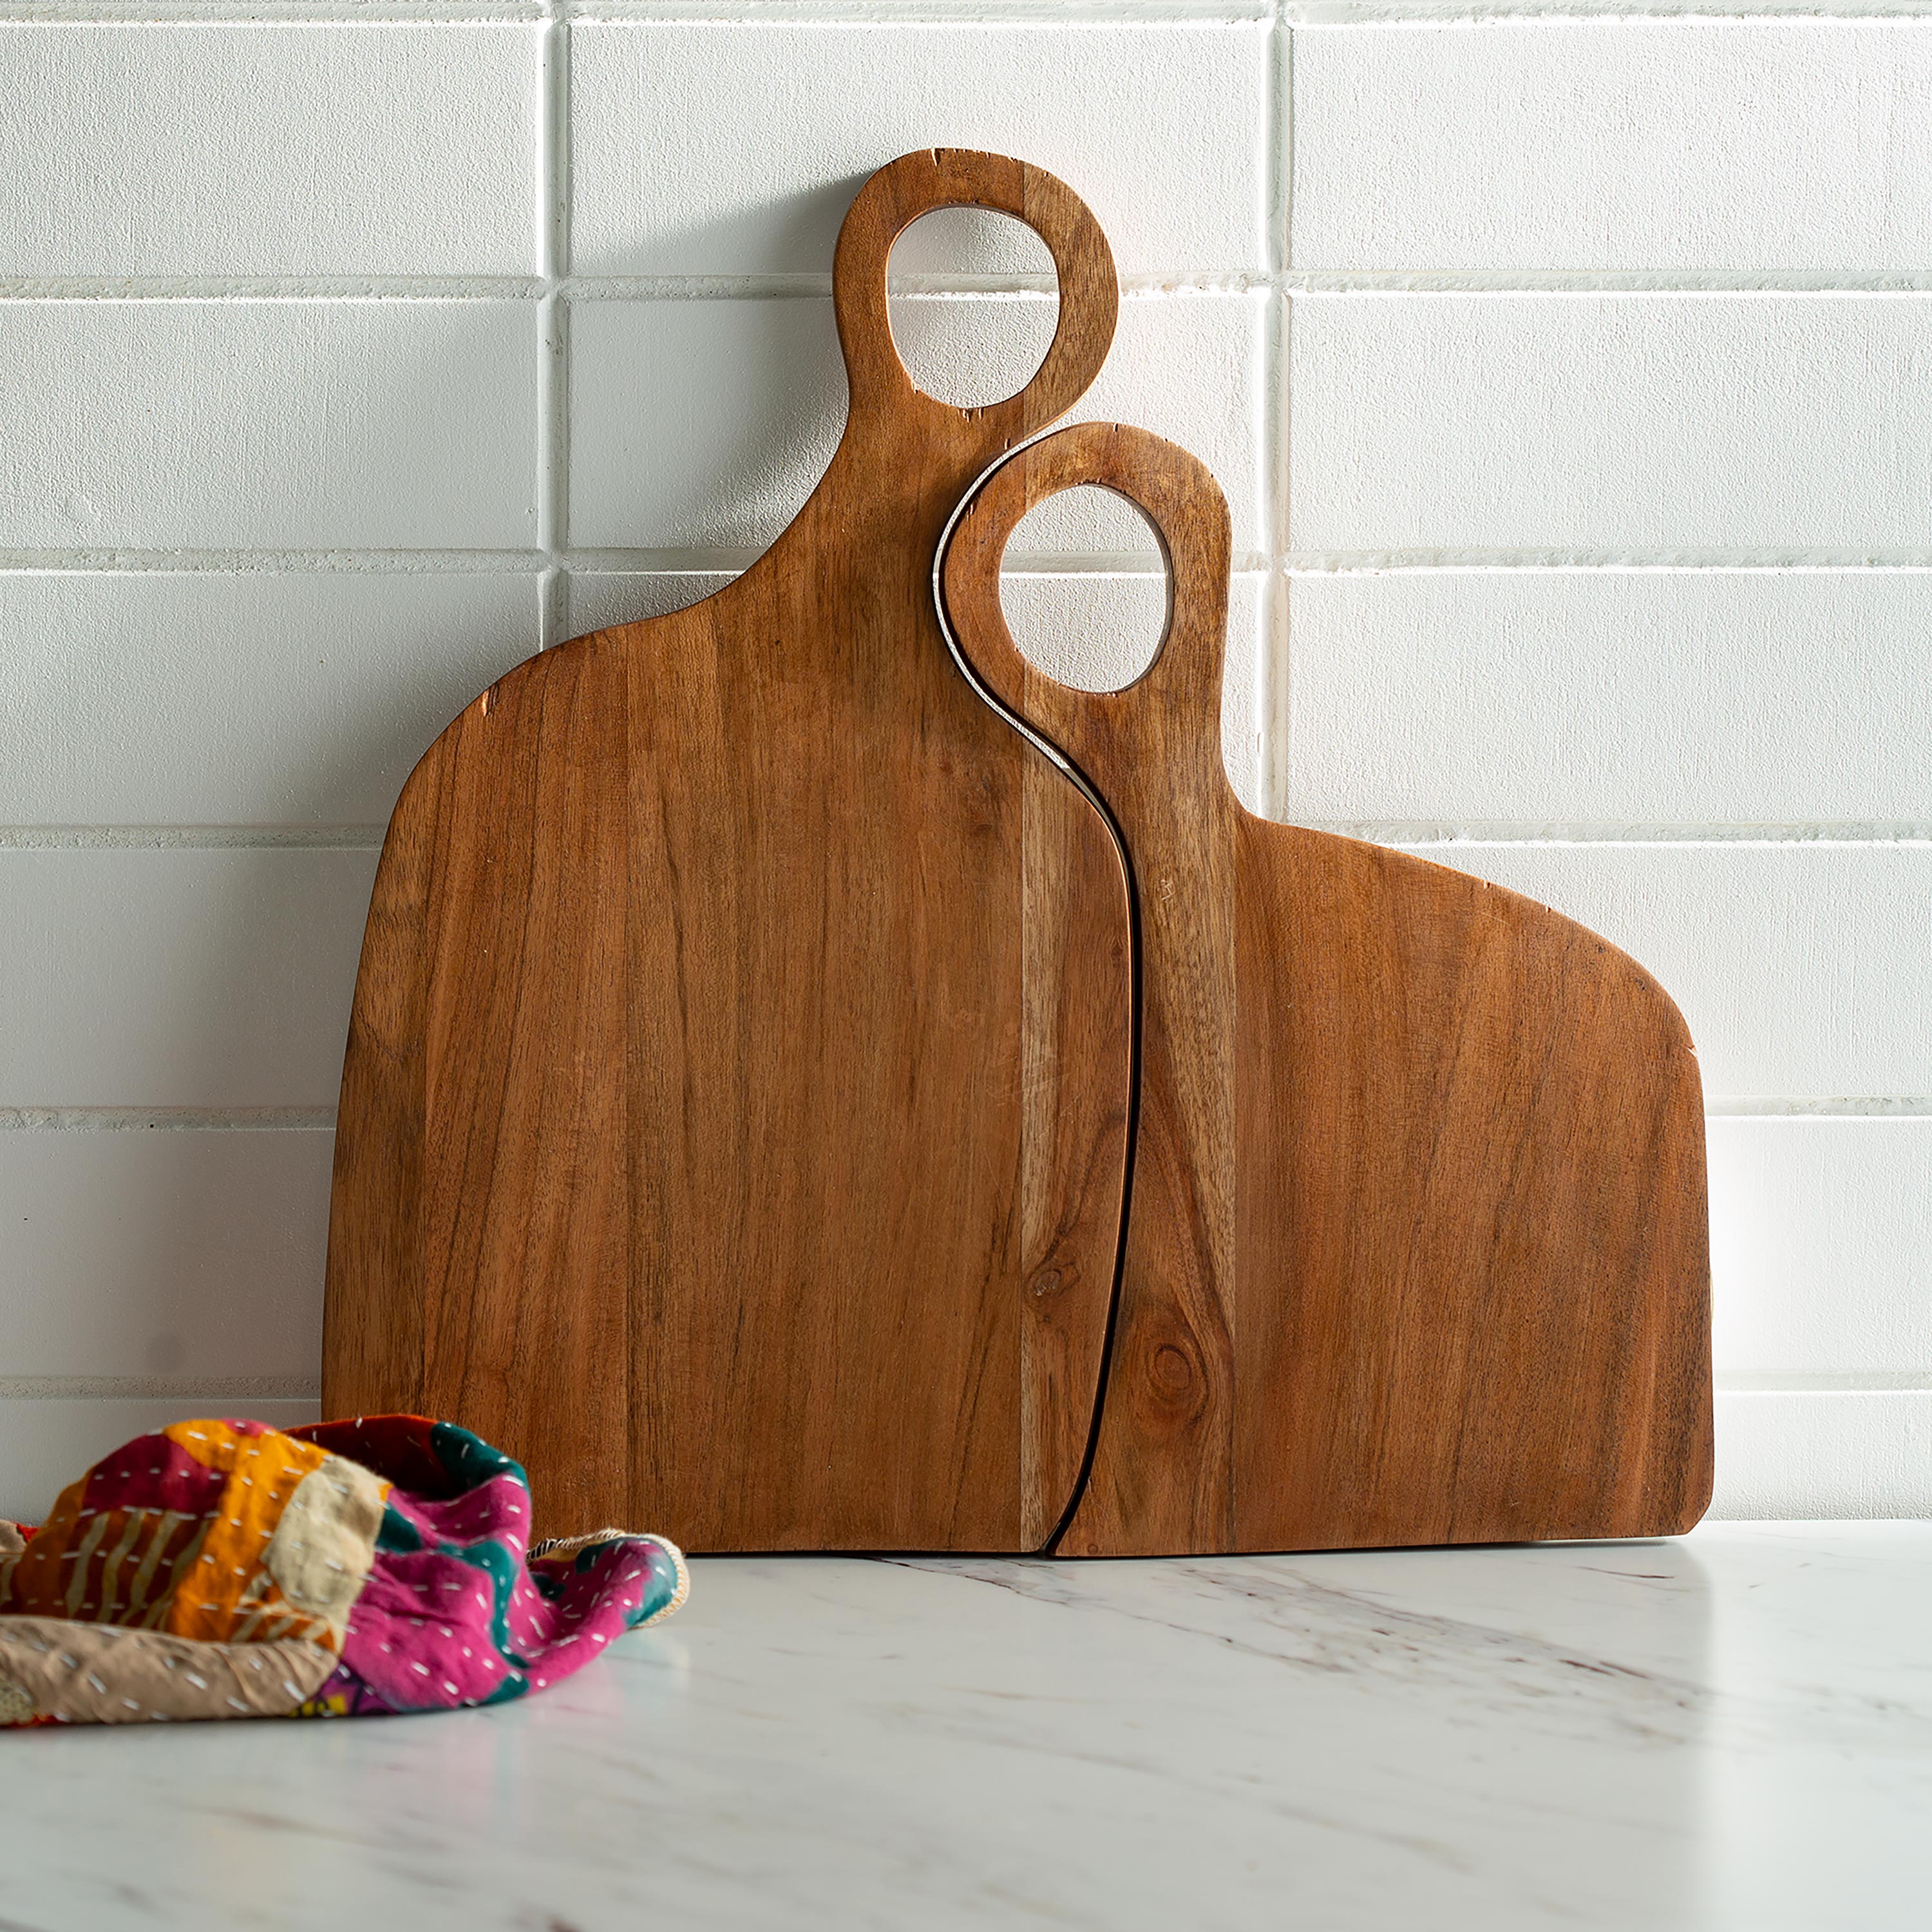 Nested Love Wood Cutting Boards Natural, Set of 2